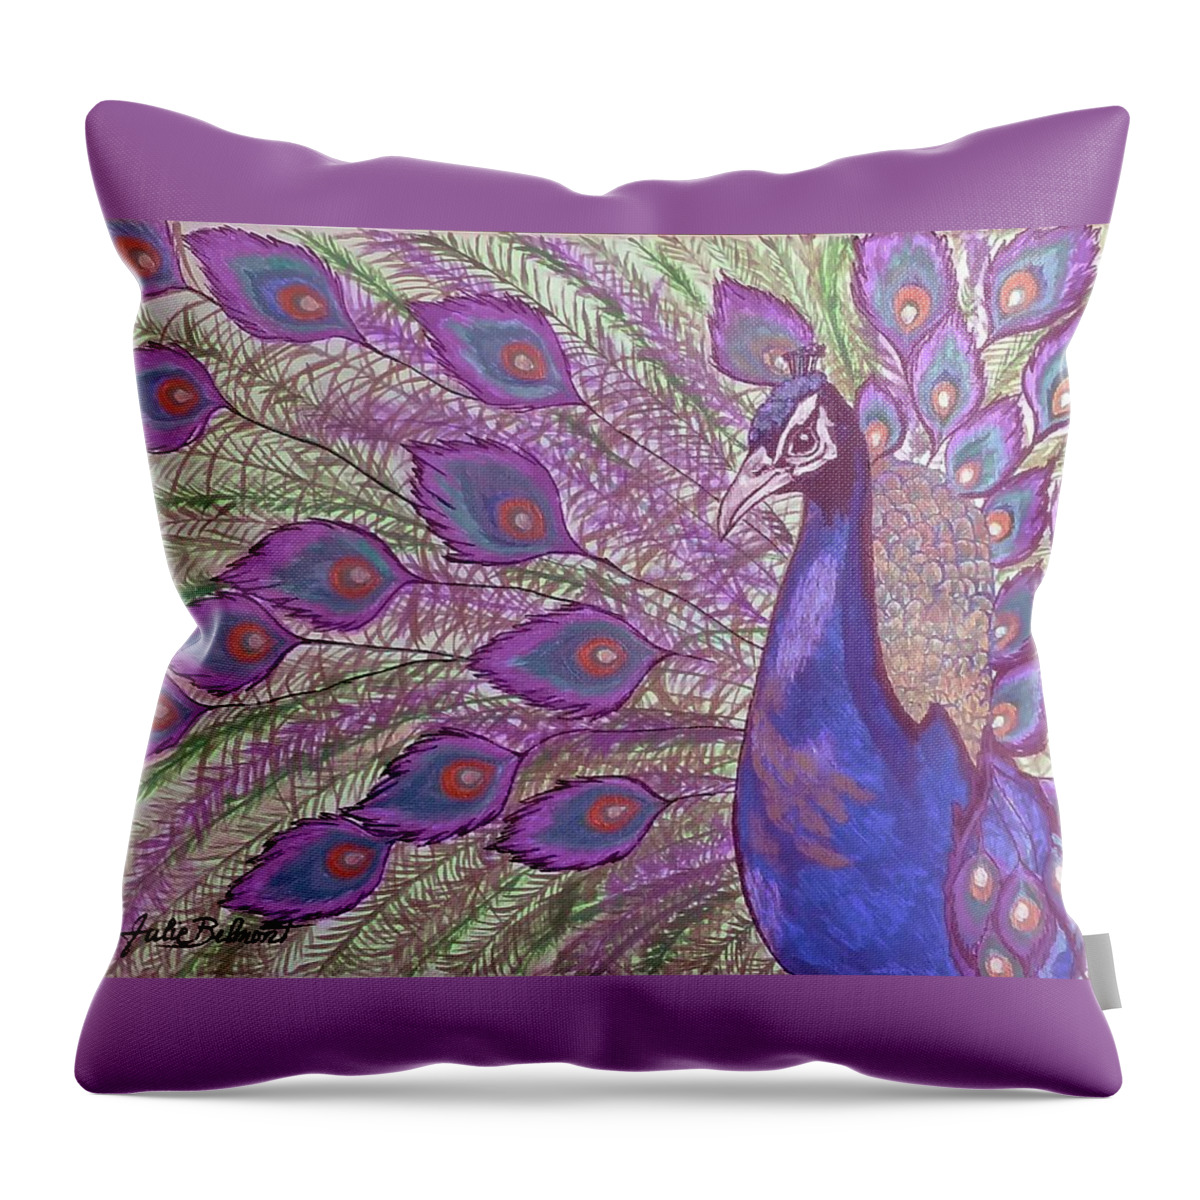 Proud Peacock Throw Pillow featuring the painting Peacock Pride by Julie Belmont